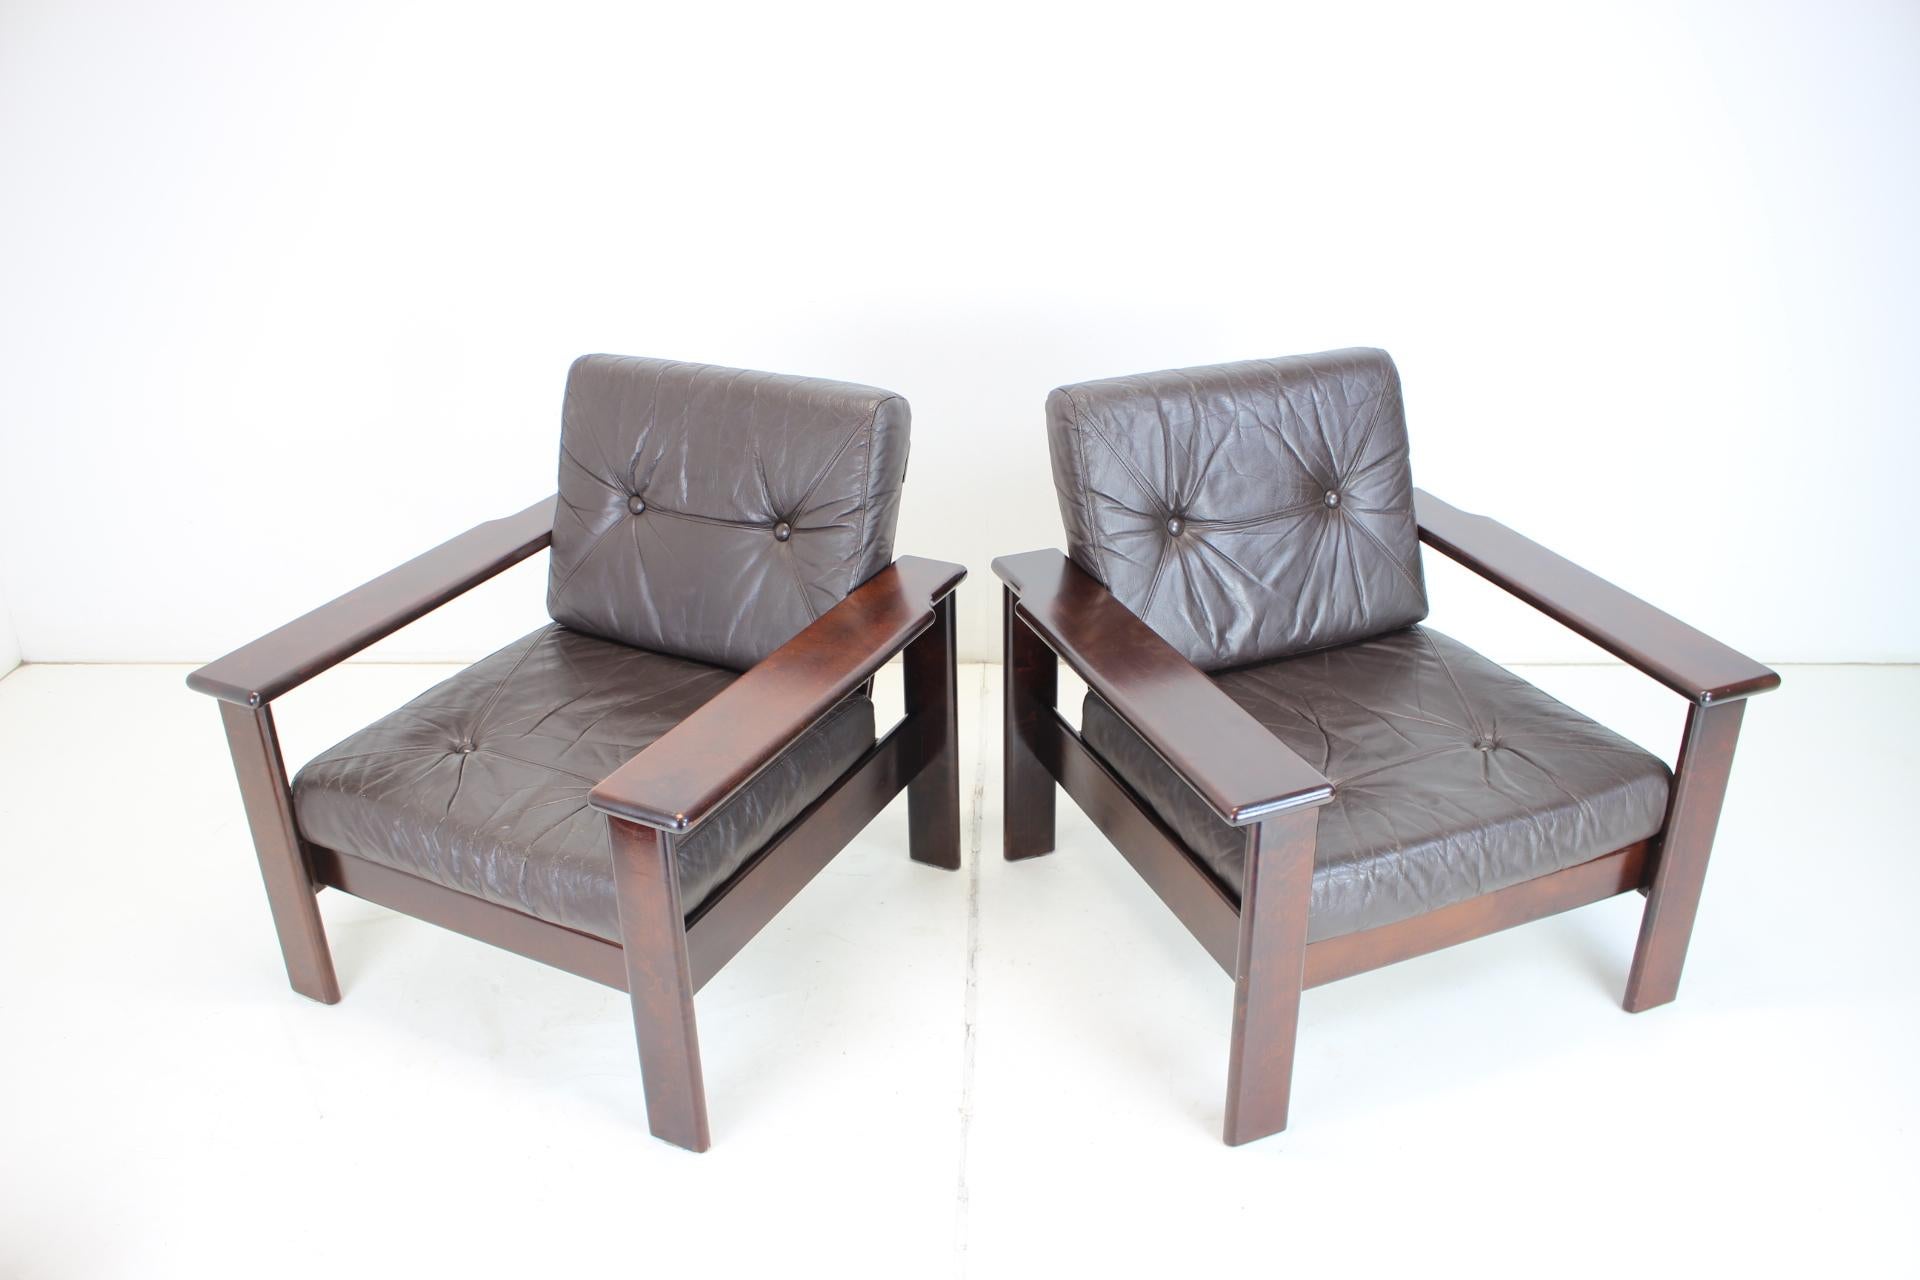 
- Made of wood, leather
- Good condition.
- Fabric suitable for exchange
- Armchairs bear signs of use